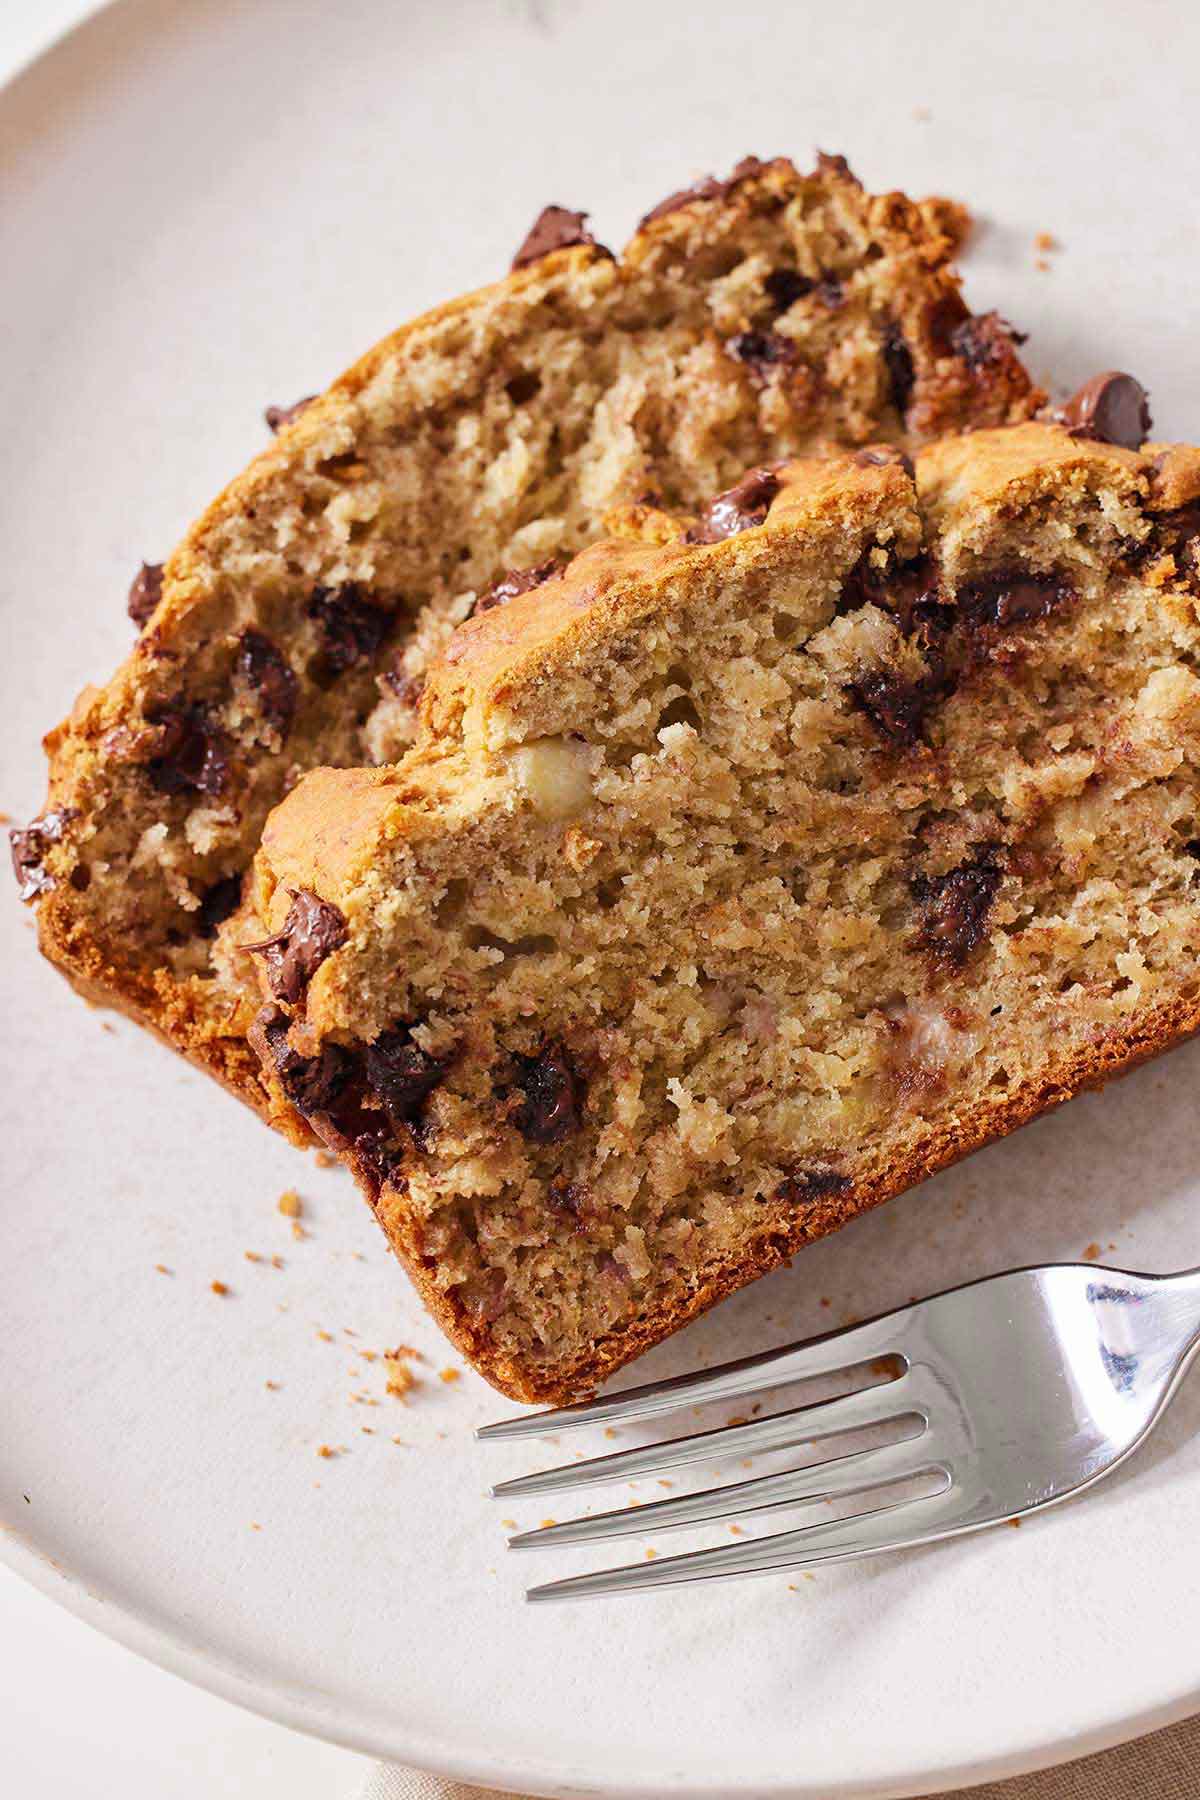 A plate with two slices of gluten free chocolate chip banana bread with a fork beside them.